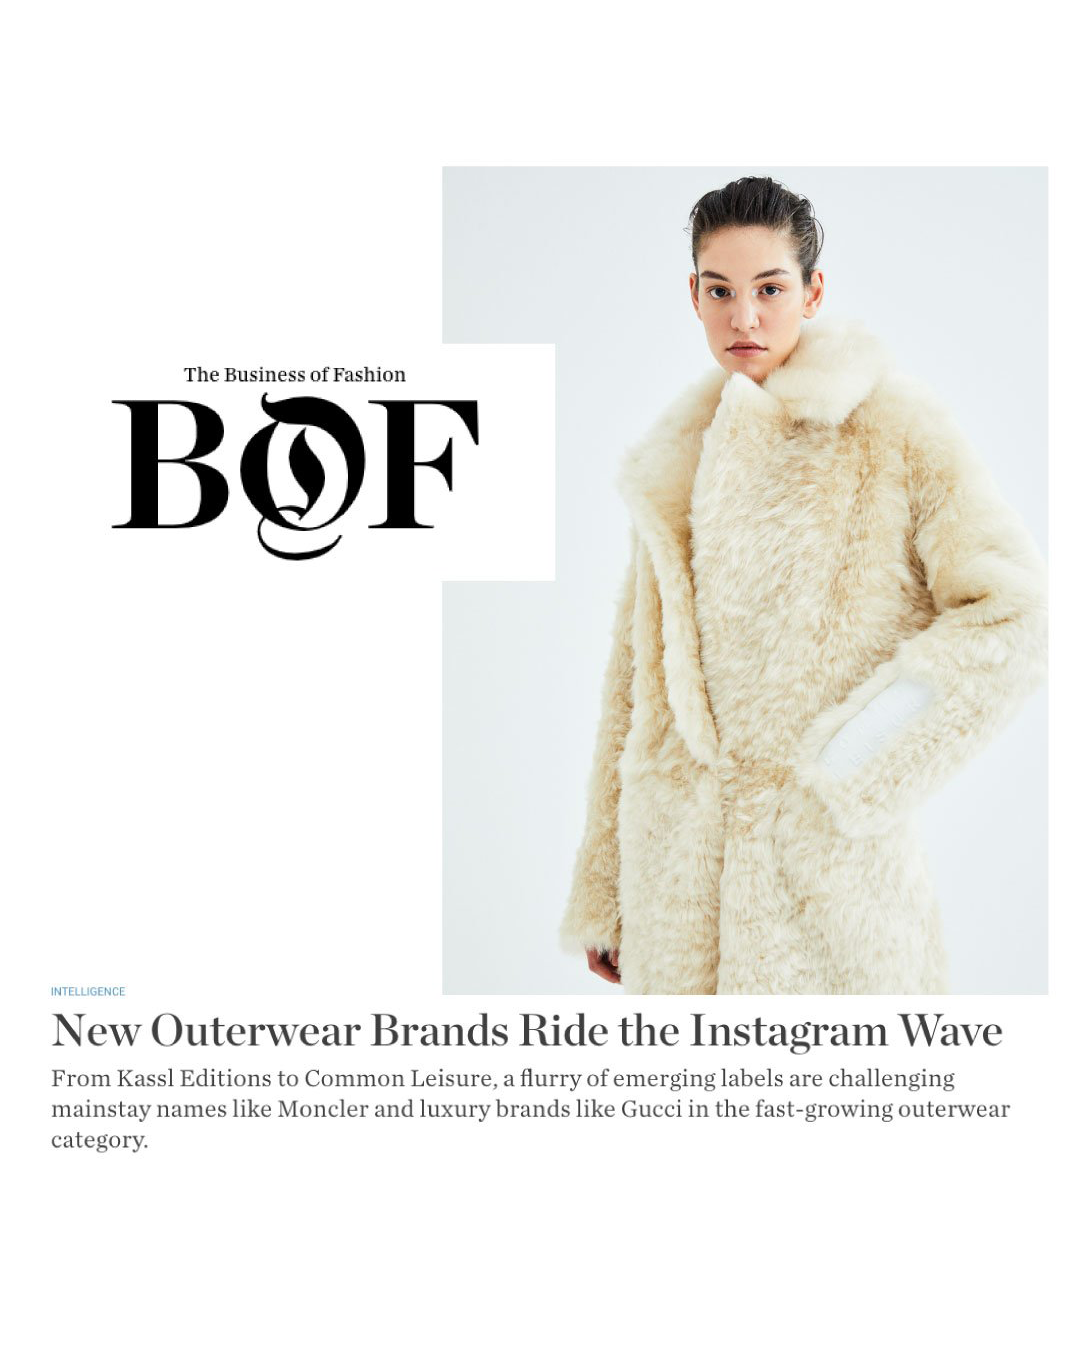 NEW OUTERWEAR BRANDS RIDE THE INSTAGRAM WAVE BY BOF